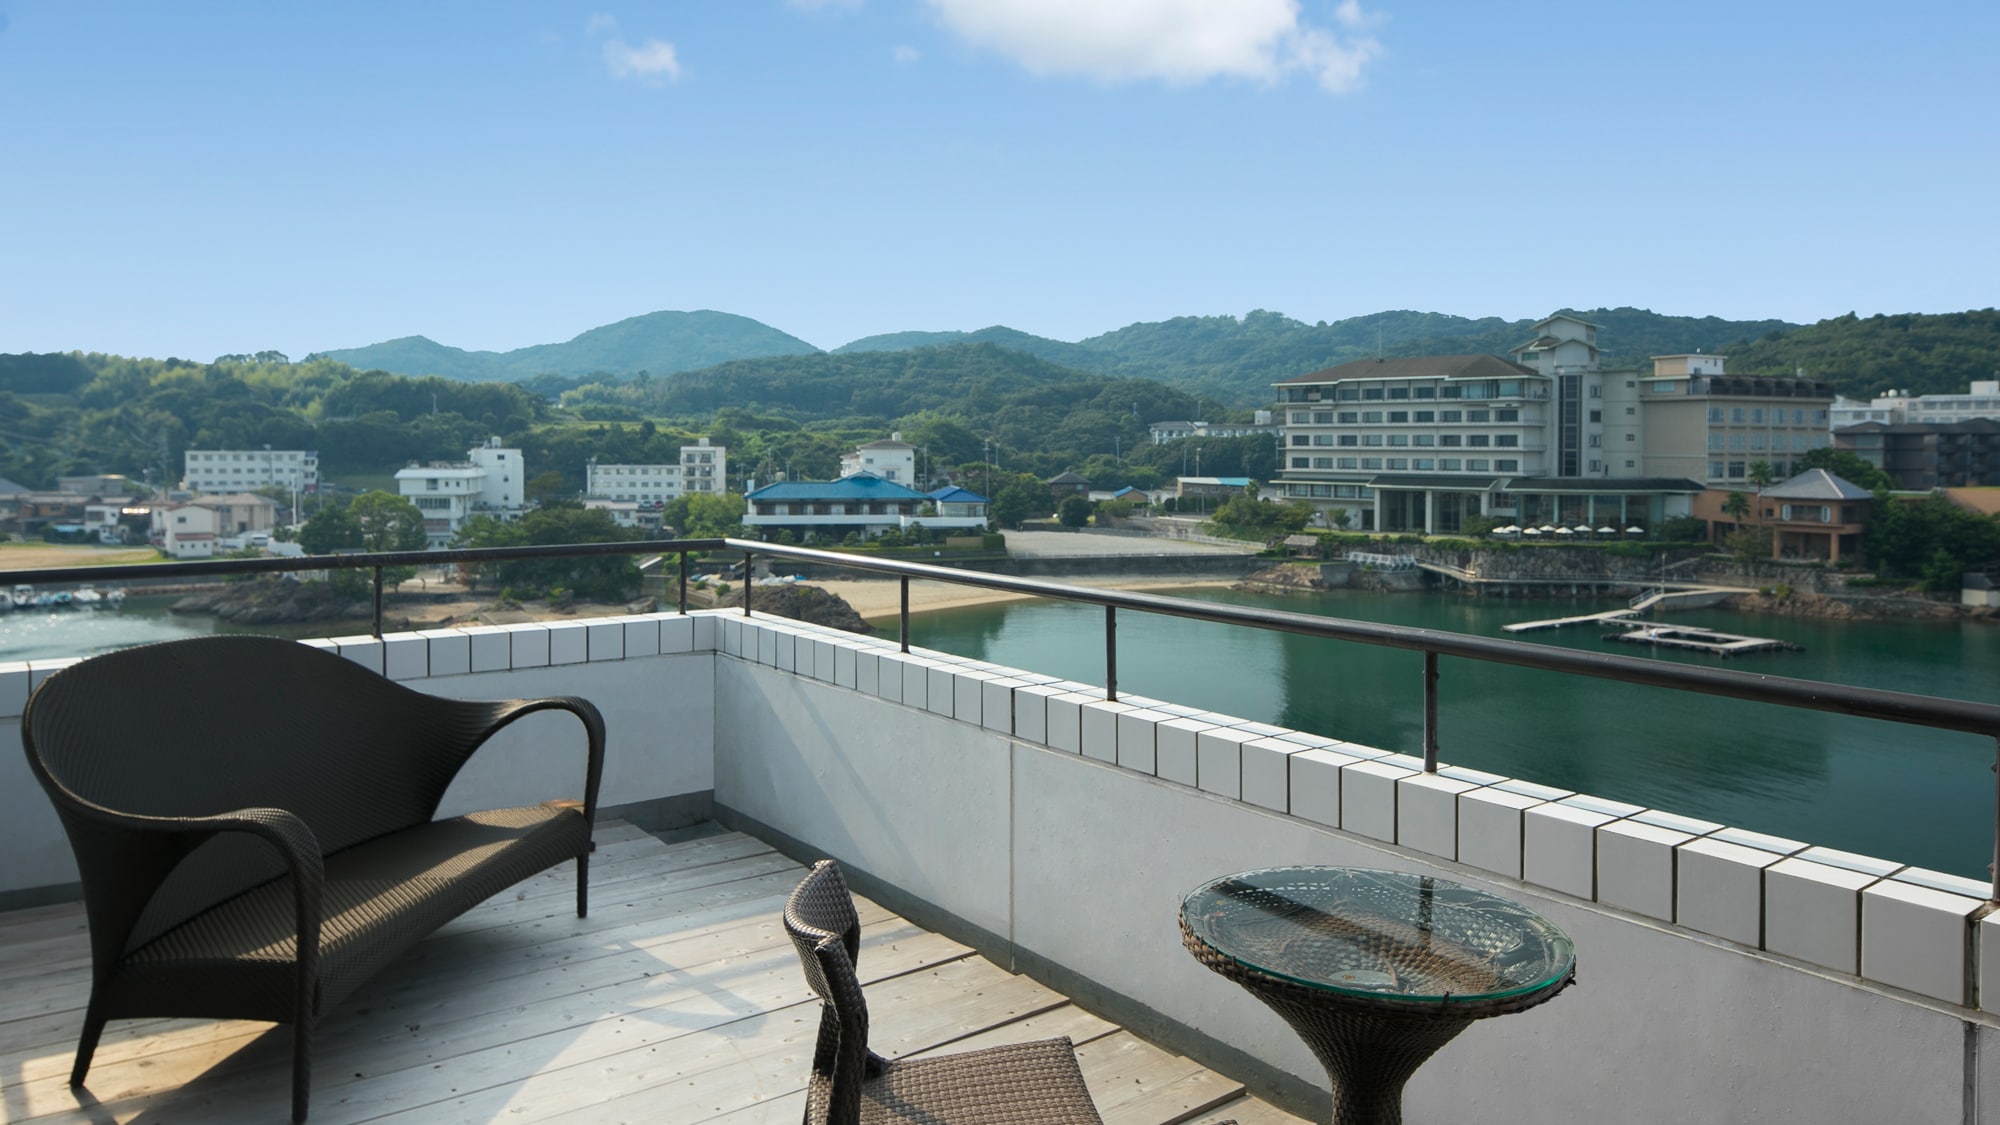 ≪Ocean Spa Terrace Room with Hot Spring Open-air Bath≫ Enjoy the view from the top floor of Shimahana.